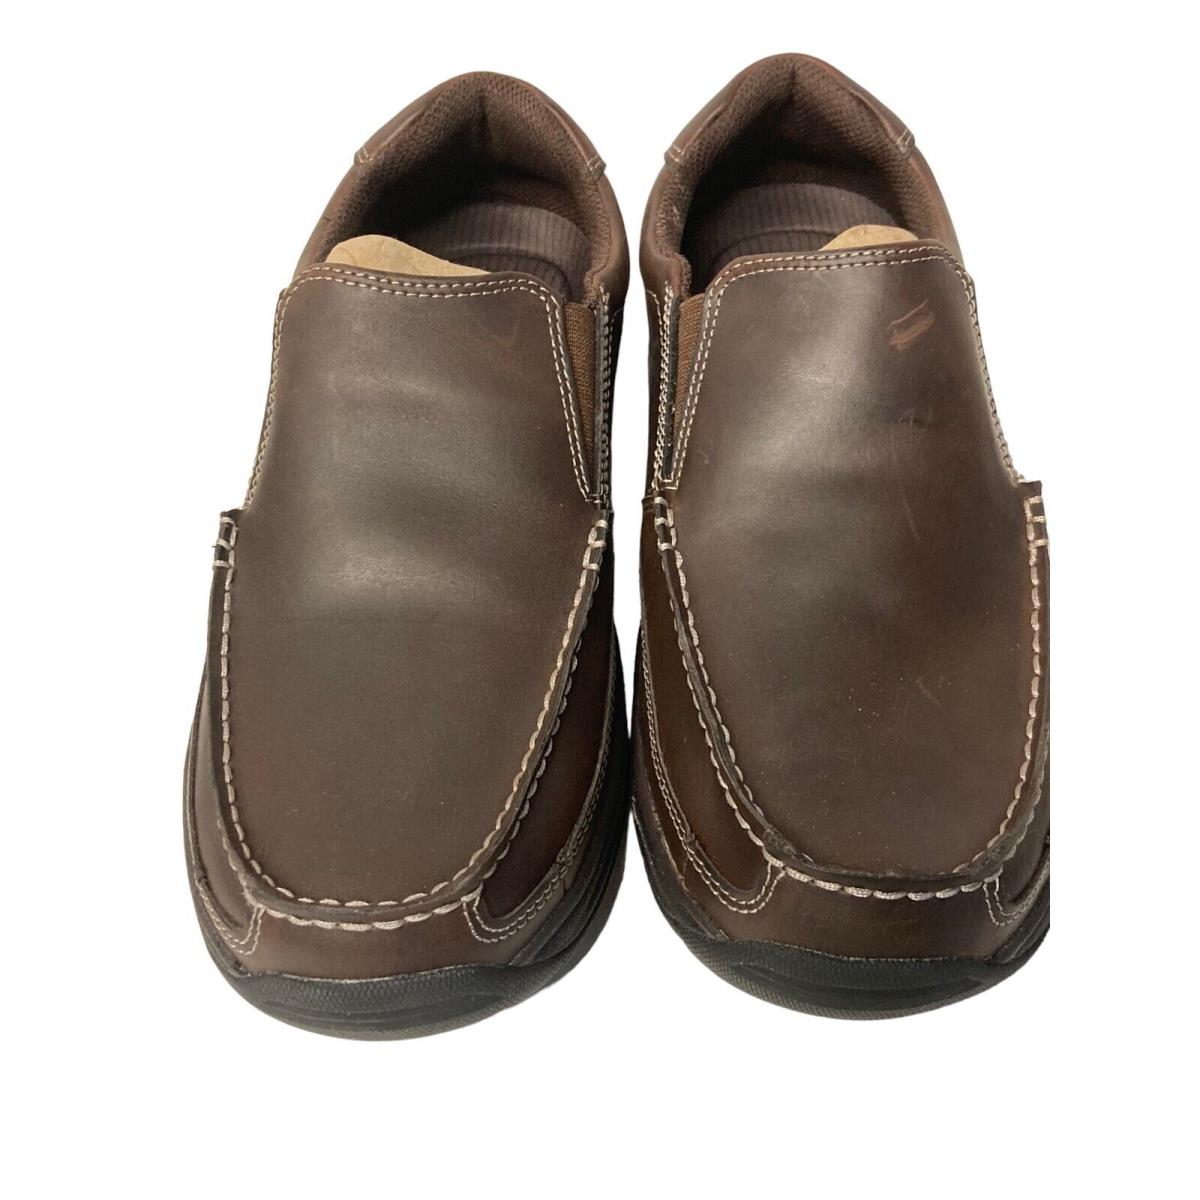 Skechers Men`s Size 8.5 Fudge Brown Leather Relaxed Fit Memory Foam Shoes